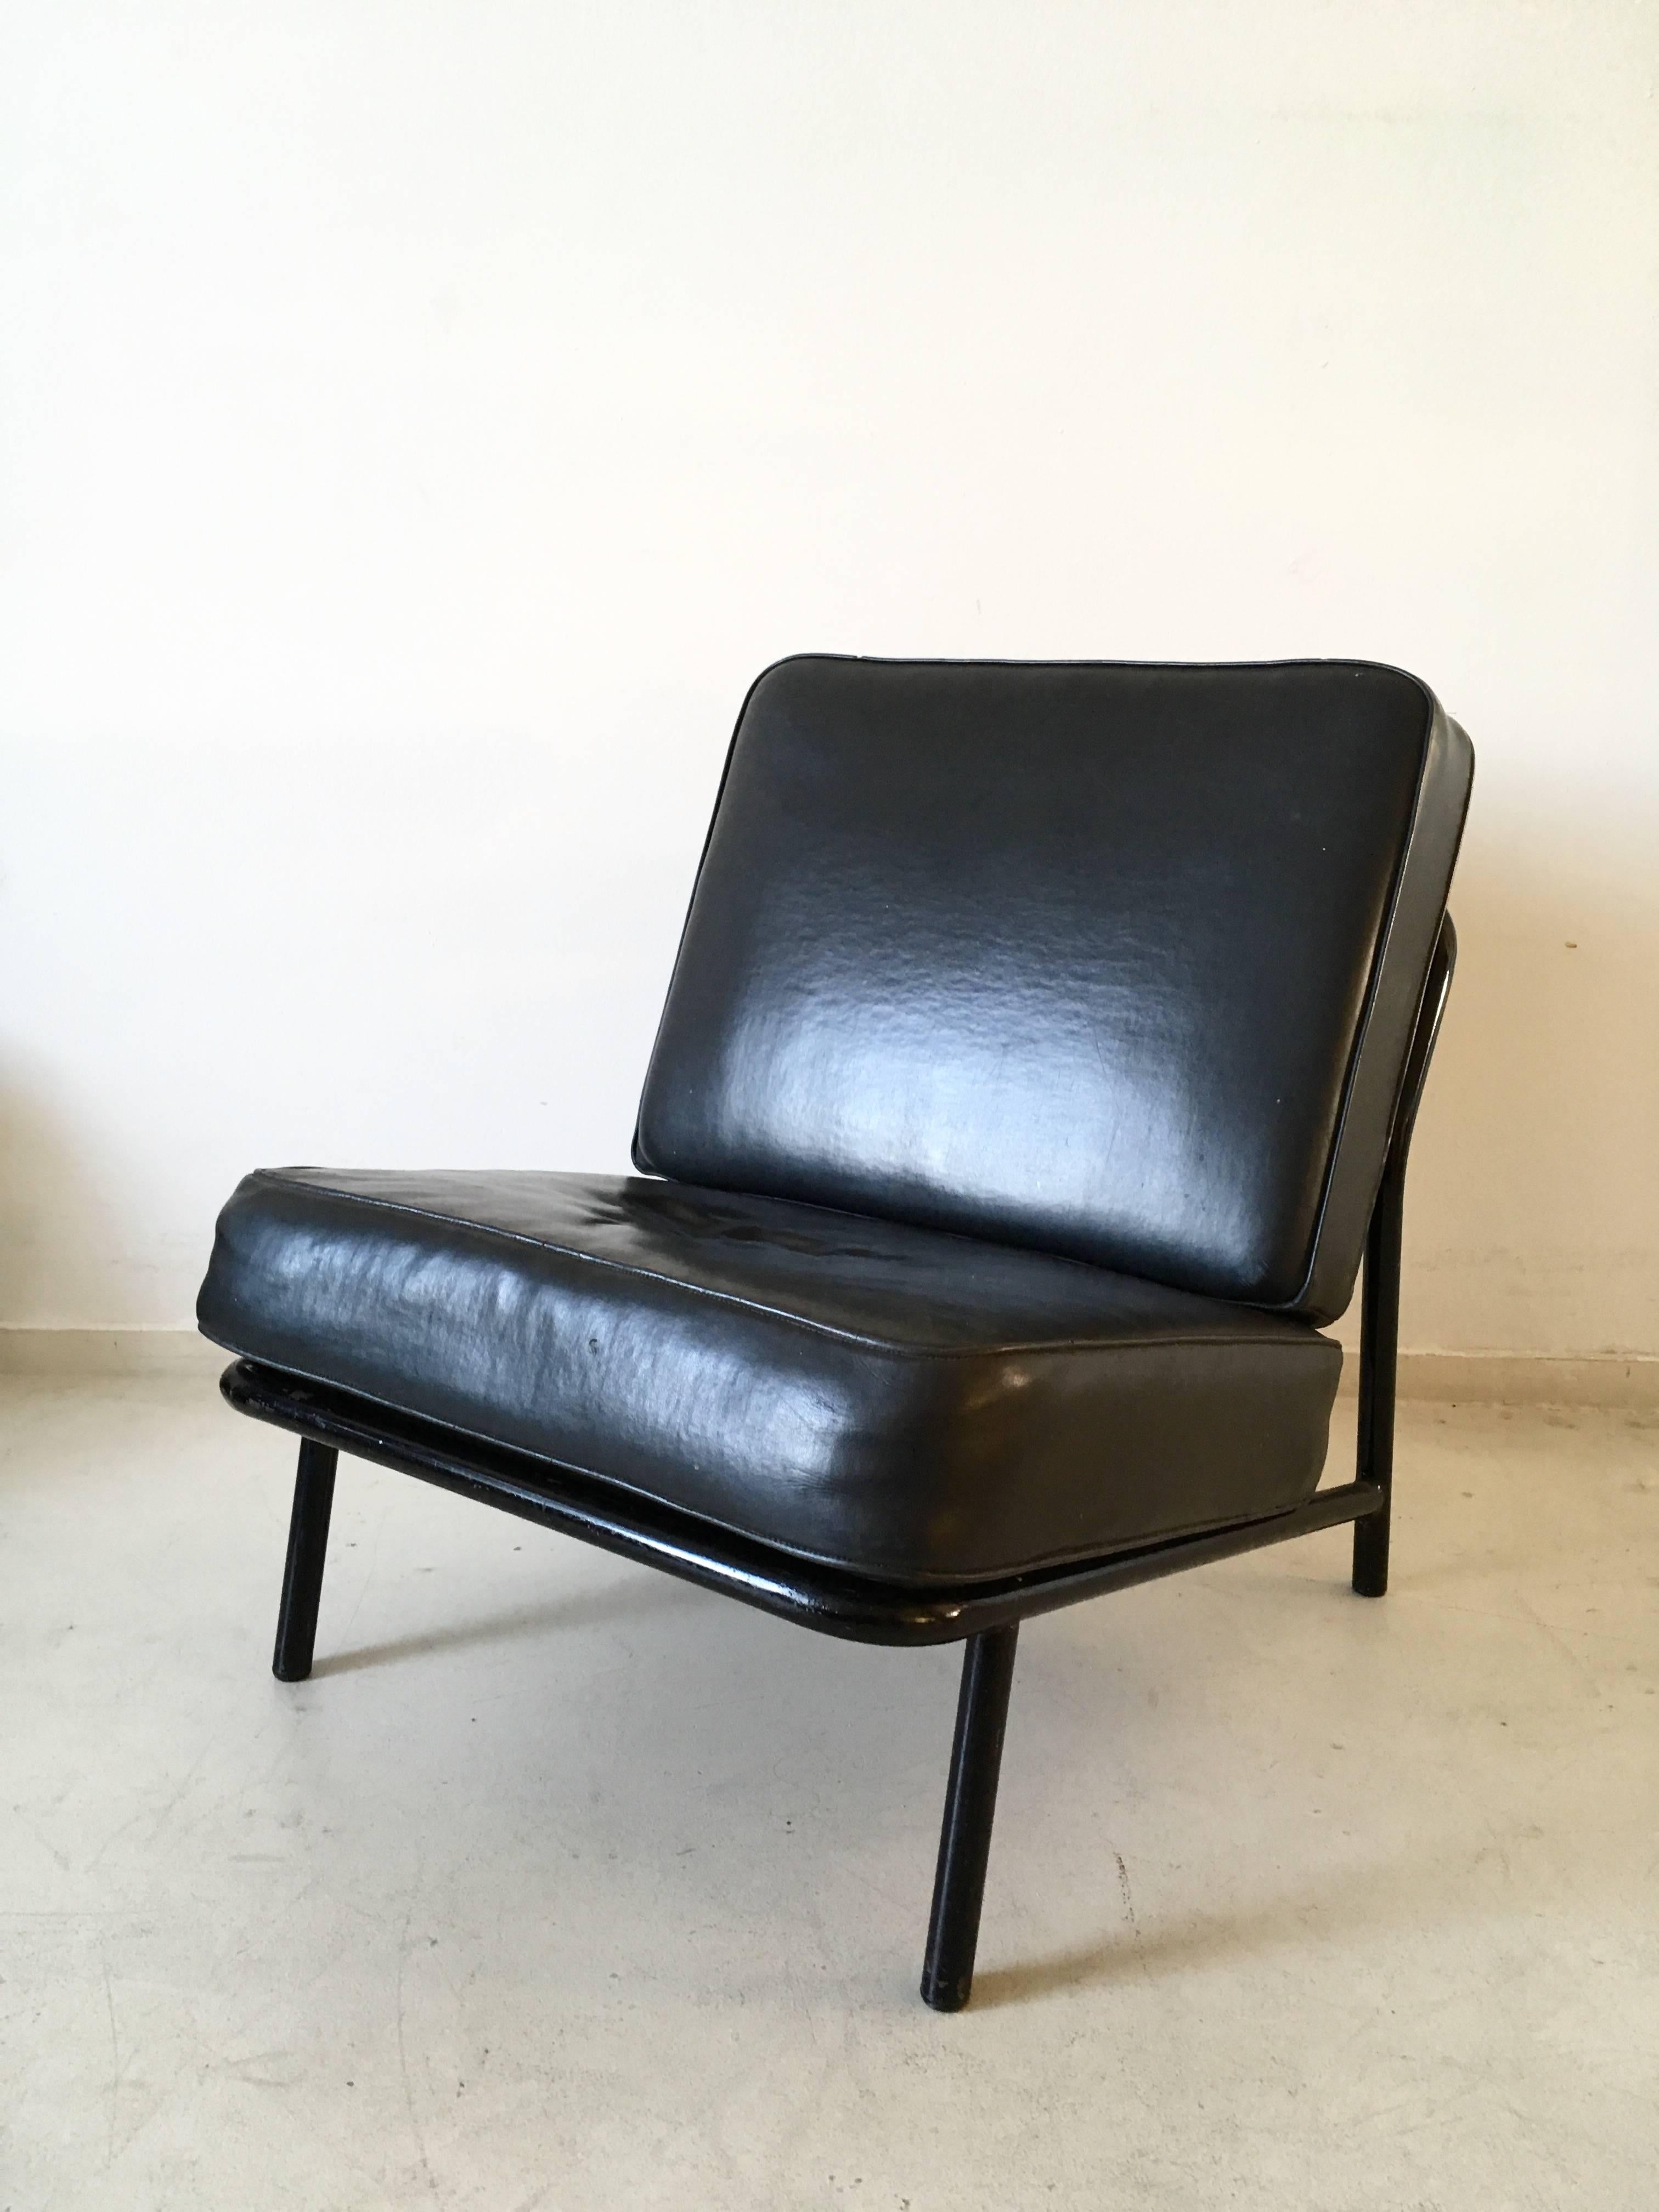 This lounge or easy chair was designed by Alf Svensson for DUX in Sweden, circa 1950s.

It features a black colored metal structure with in between it's frame a wooden plate. On top, old but original black leather cushions. Both, the frame and the